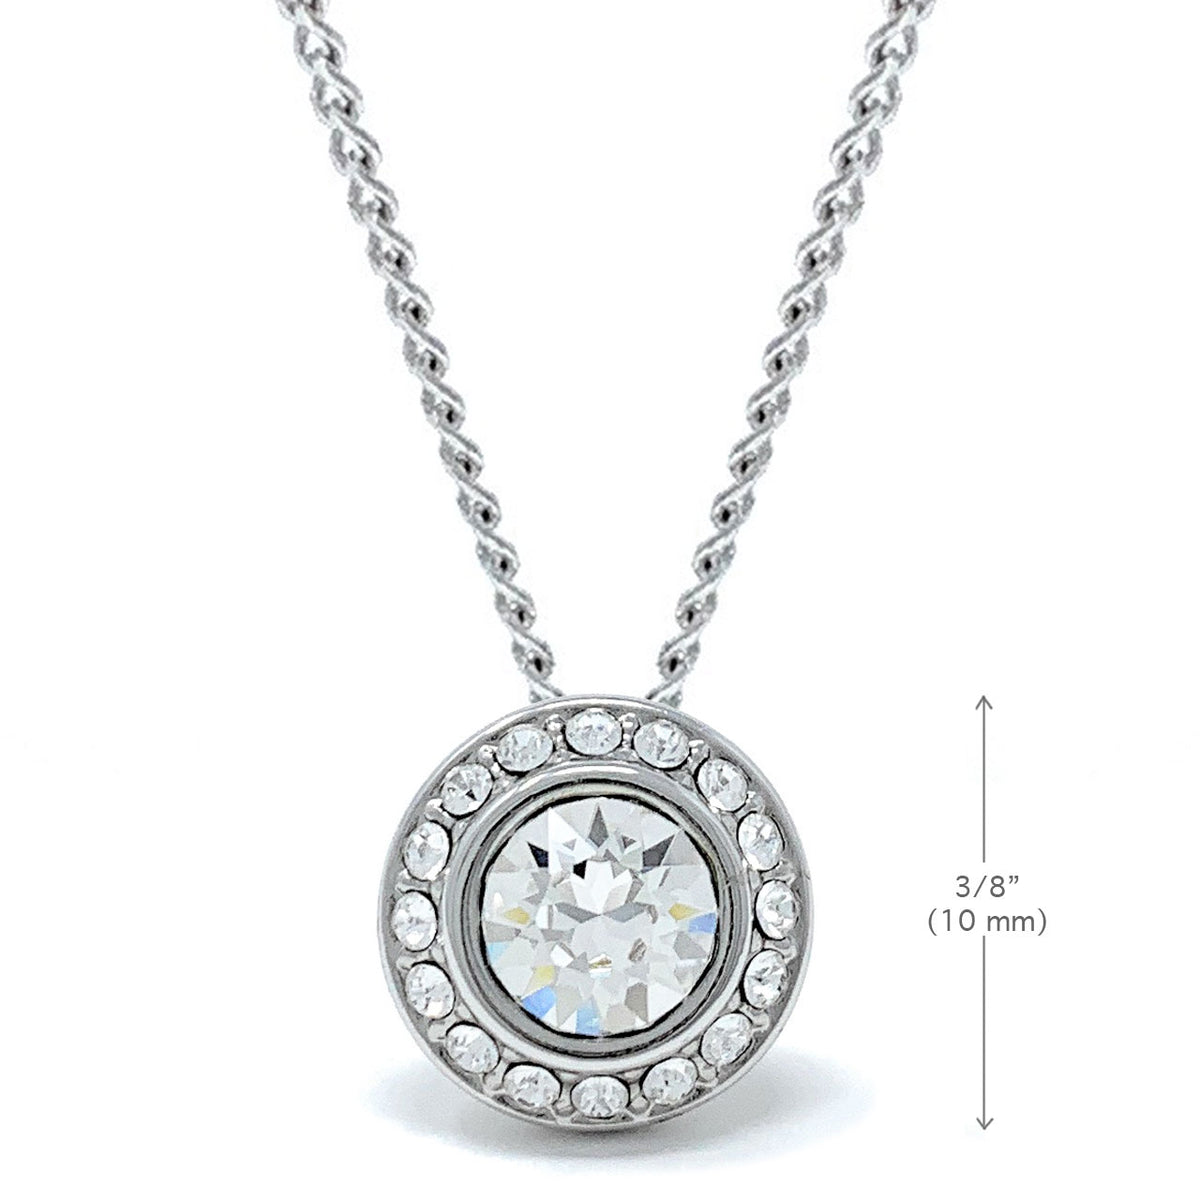 Halo Pave Pendant Necklace with White Clear Round Crystals from Swarovski Silver Toned Rhodium Plated - Ed Heart